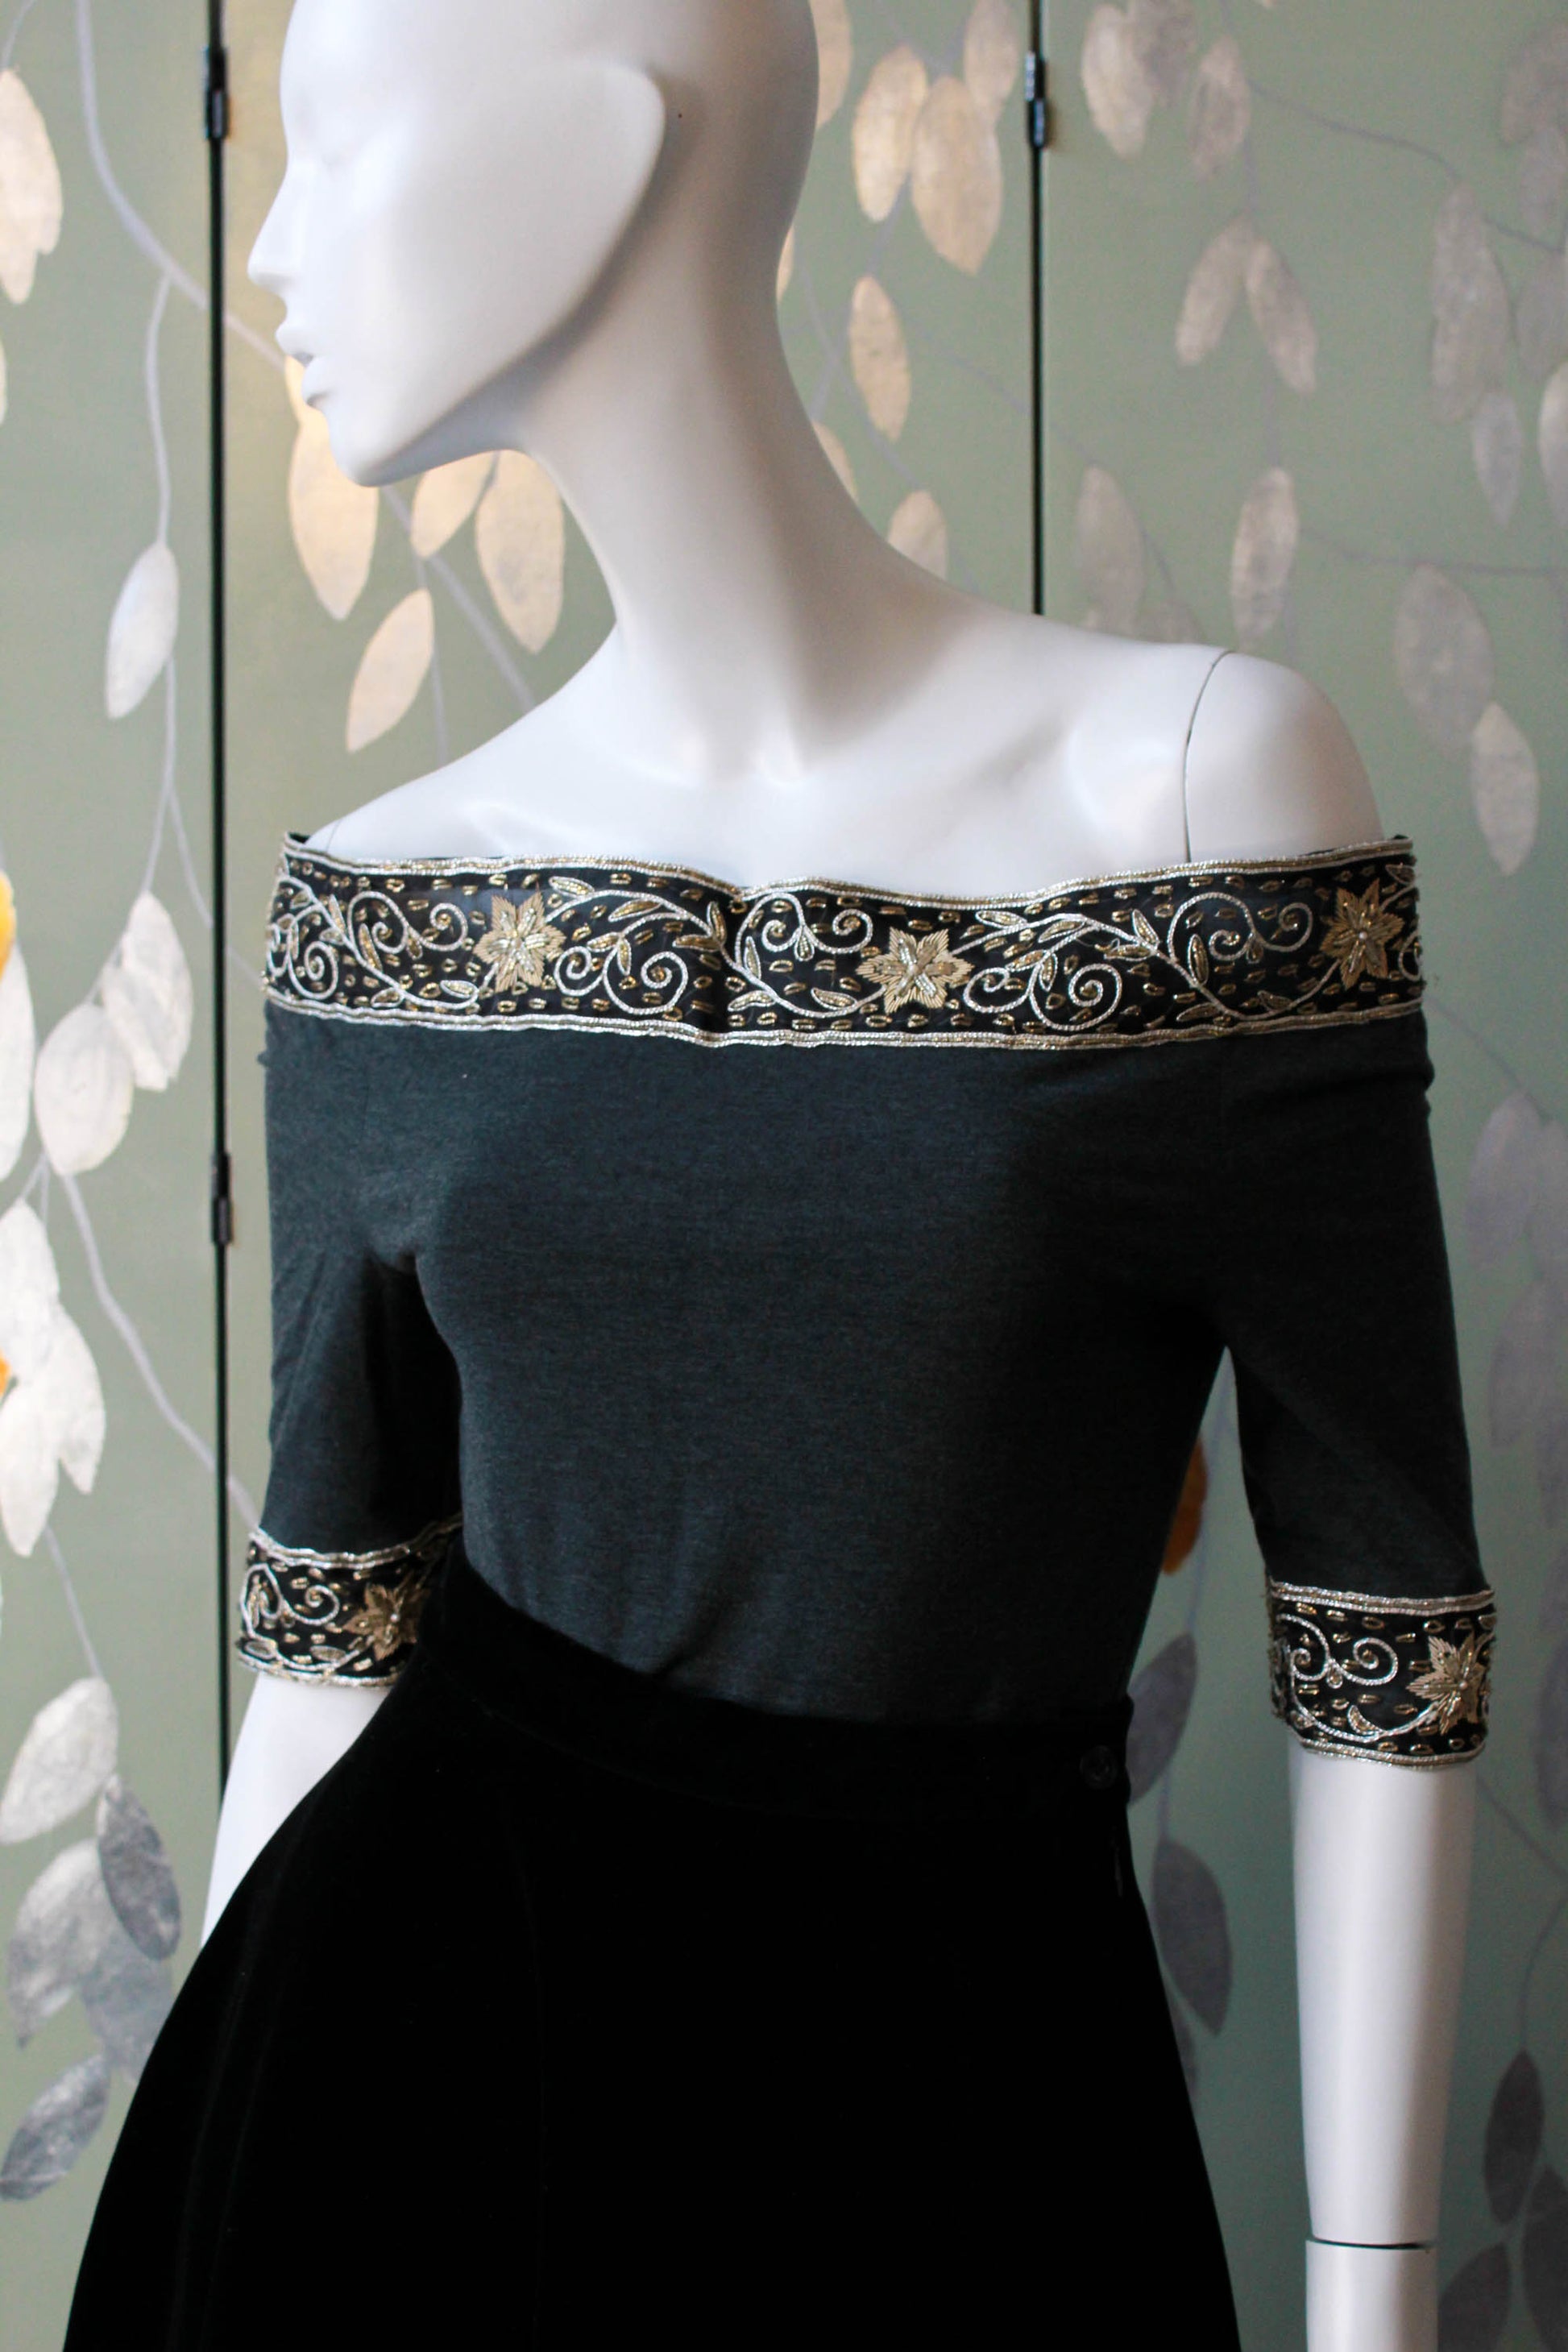 1980s romeo gigli off the shoulder knit top embroidered with gold and silver floral design